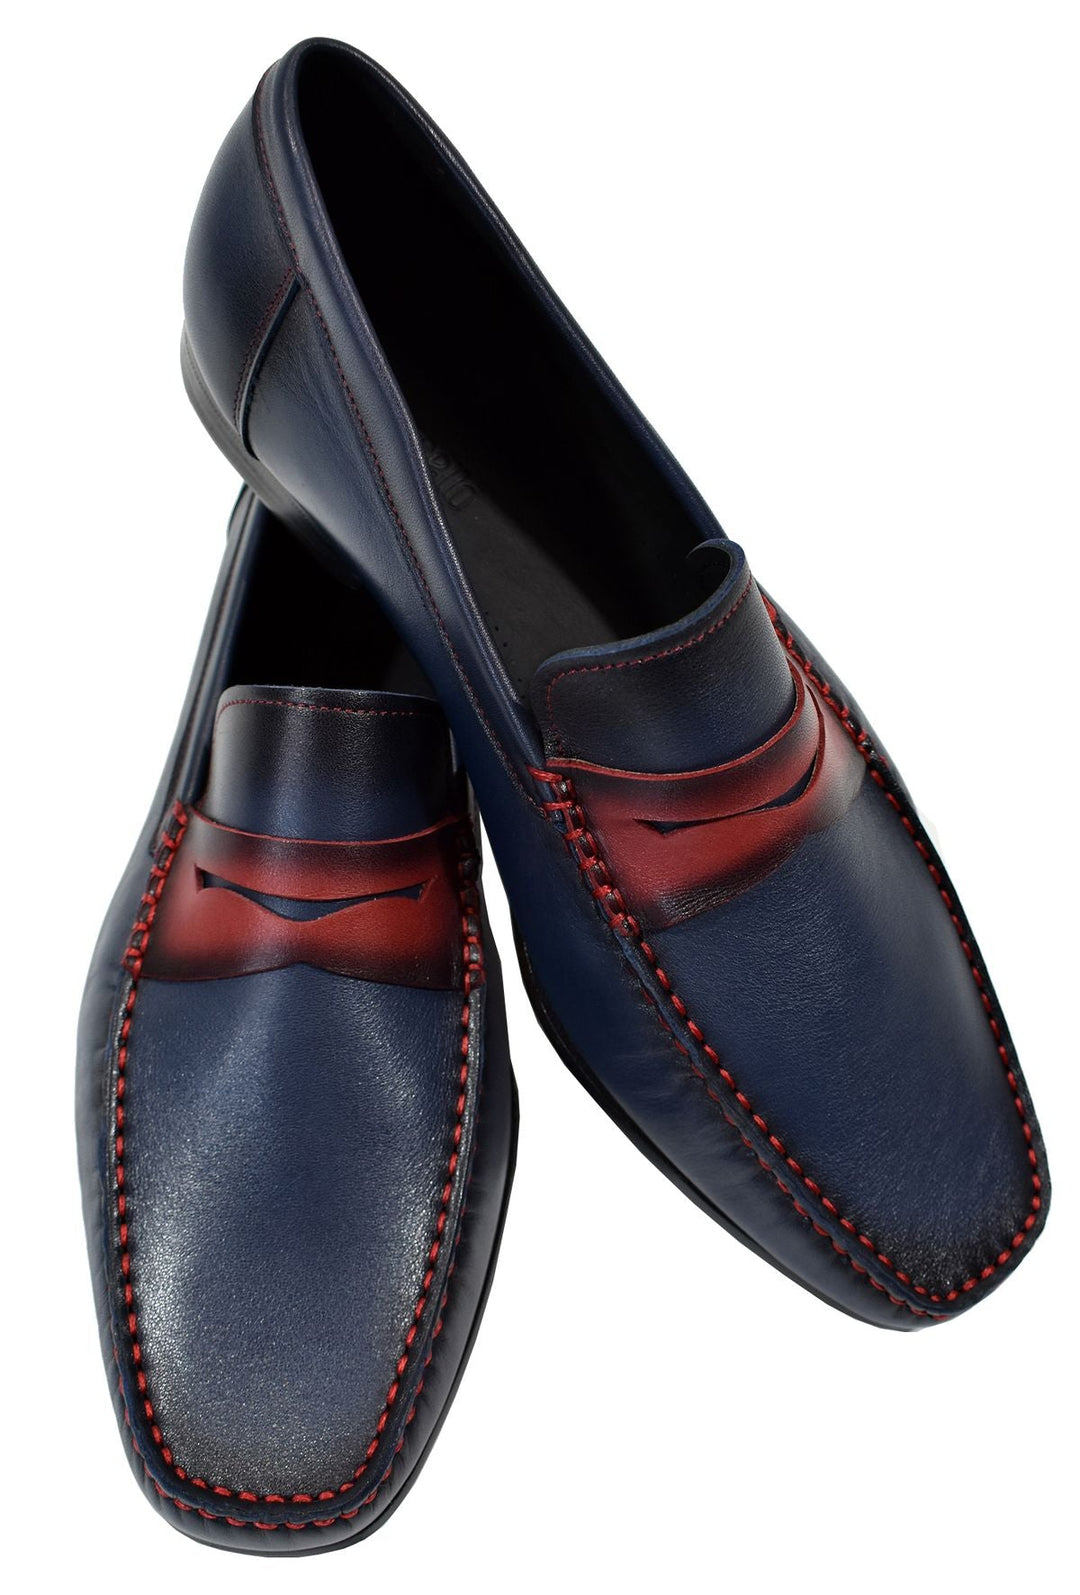 Add life and a hip look to your dress style with our burnished leather shoe in indigo with red accents.  Check out the cool matched red bottom and leather sole. Use this shoe for a casual or dress look to define classic style with an edge. Classic fit.  Hand crafted in Spain. Shoe by Marcello.